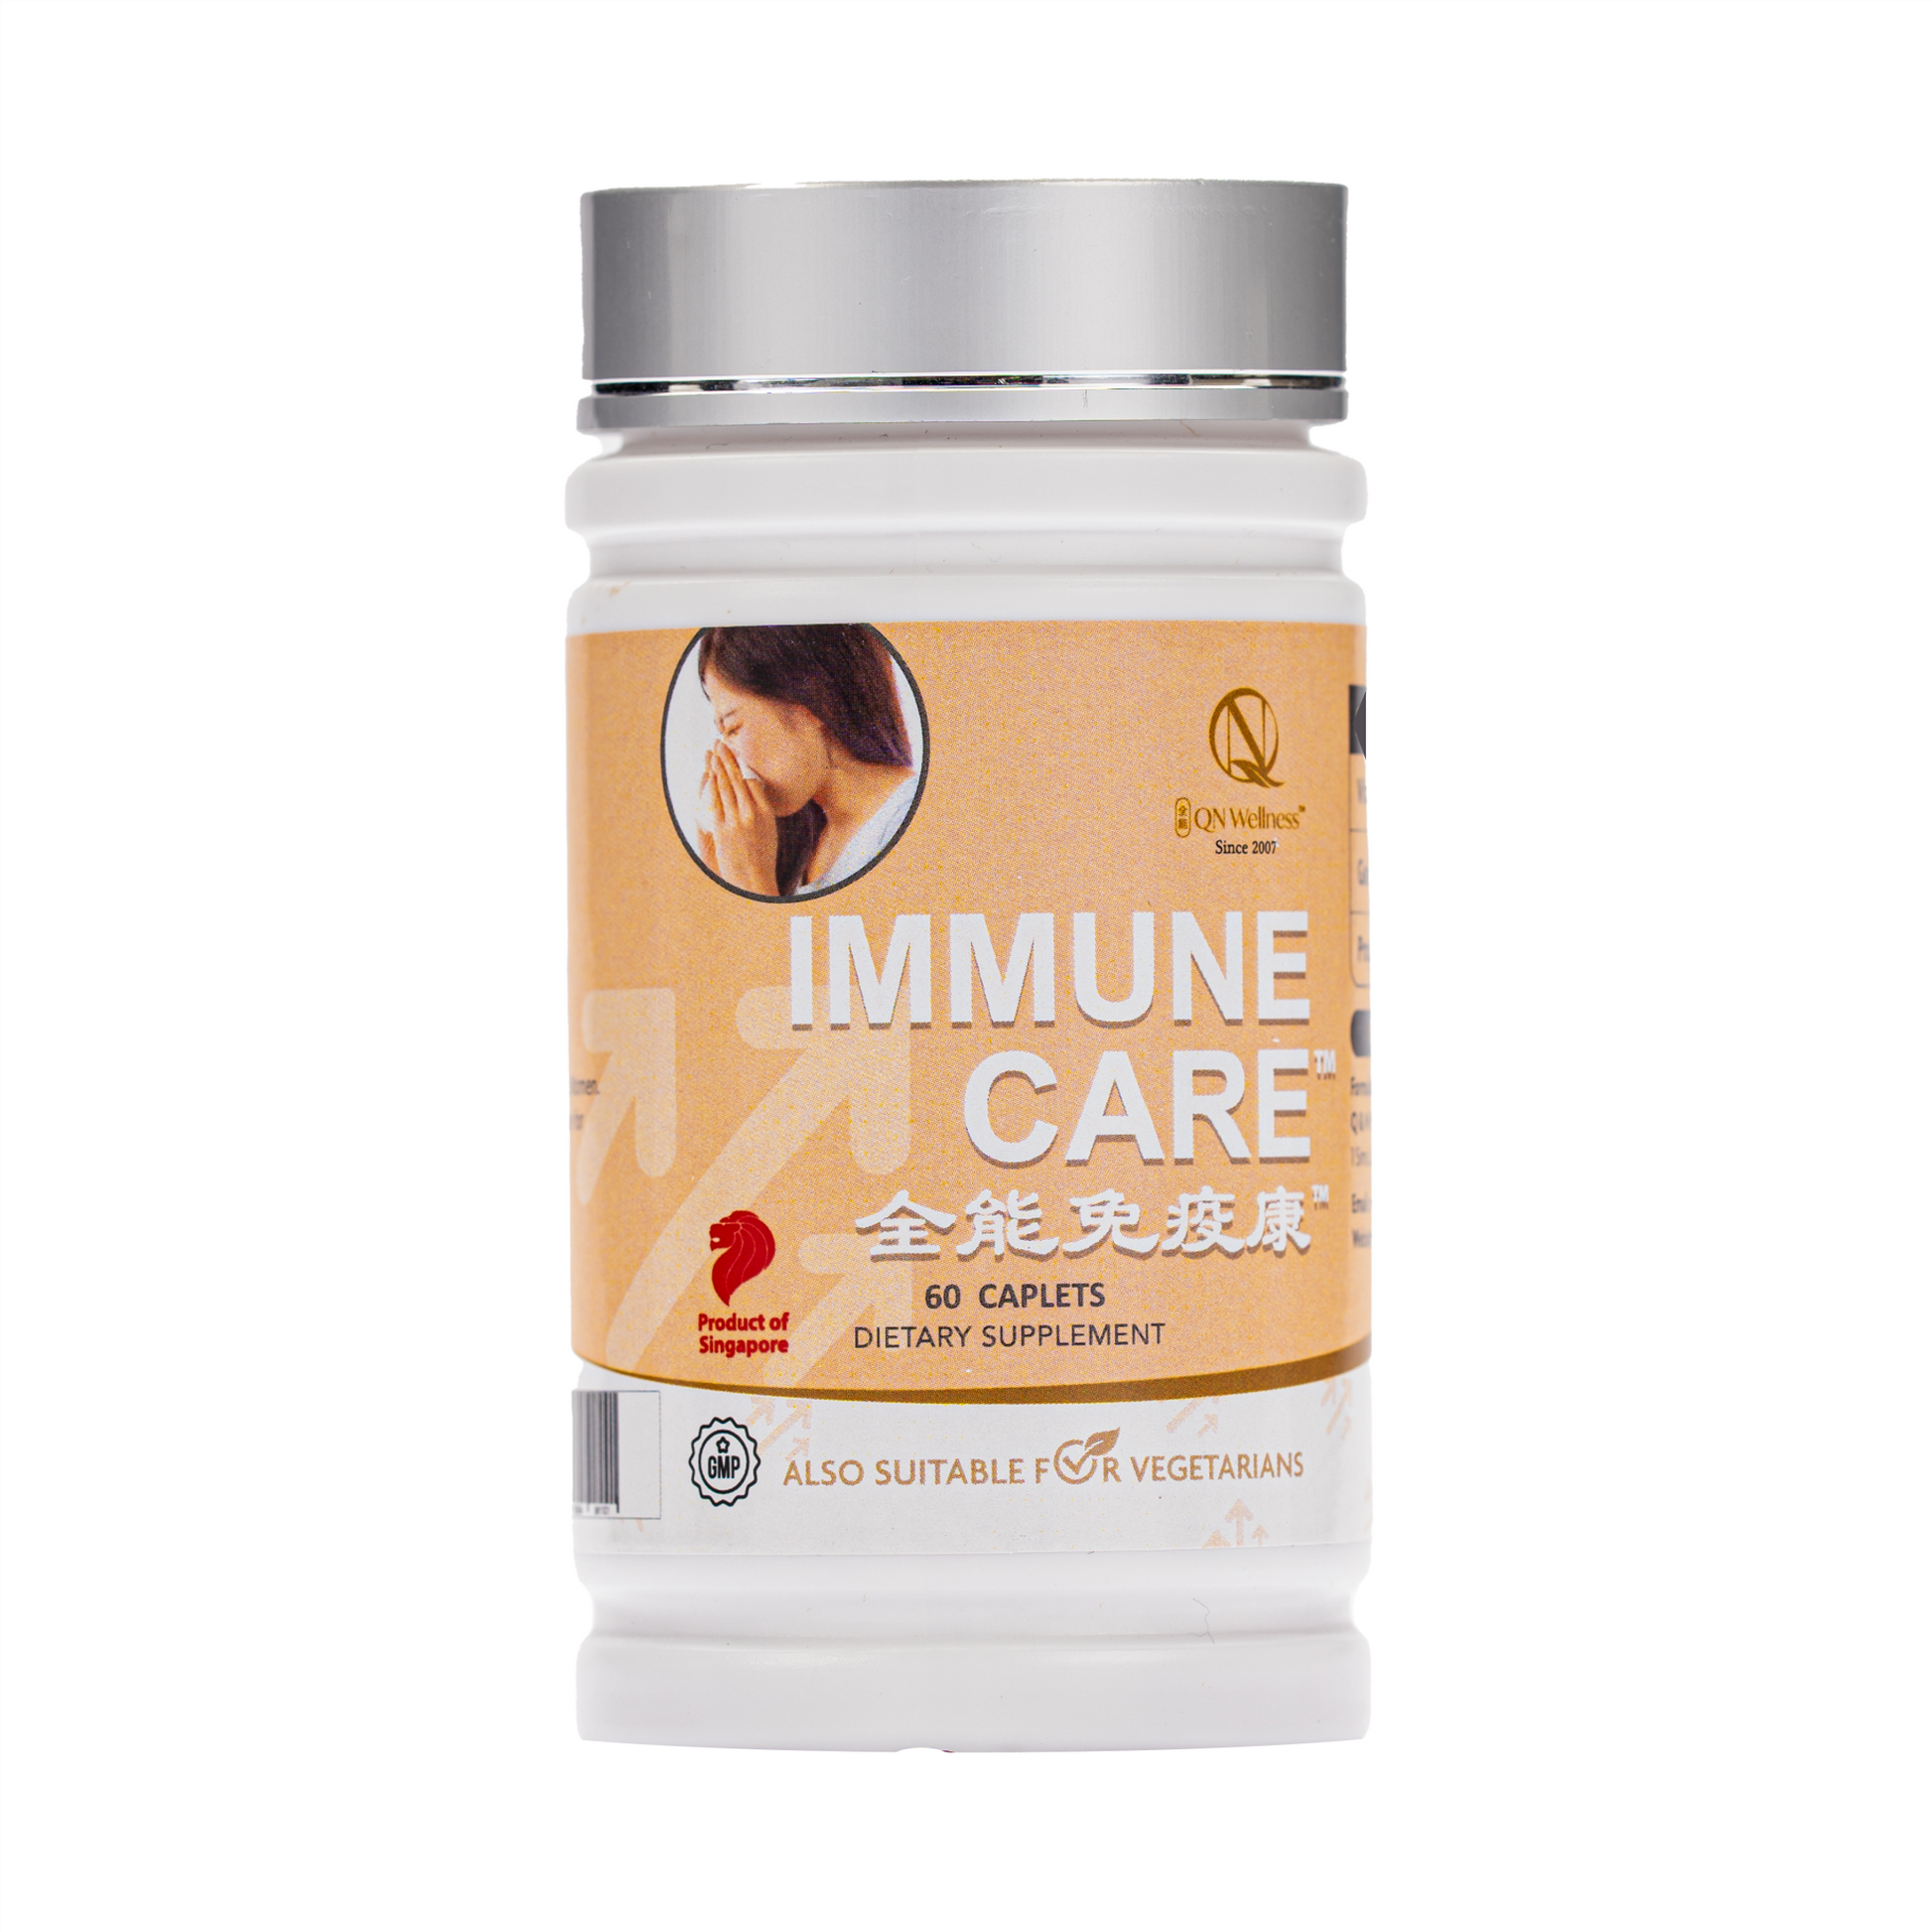 plant based supplements | Immune care